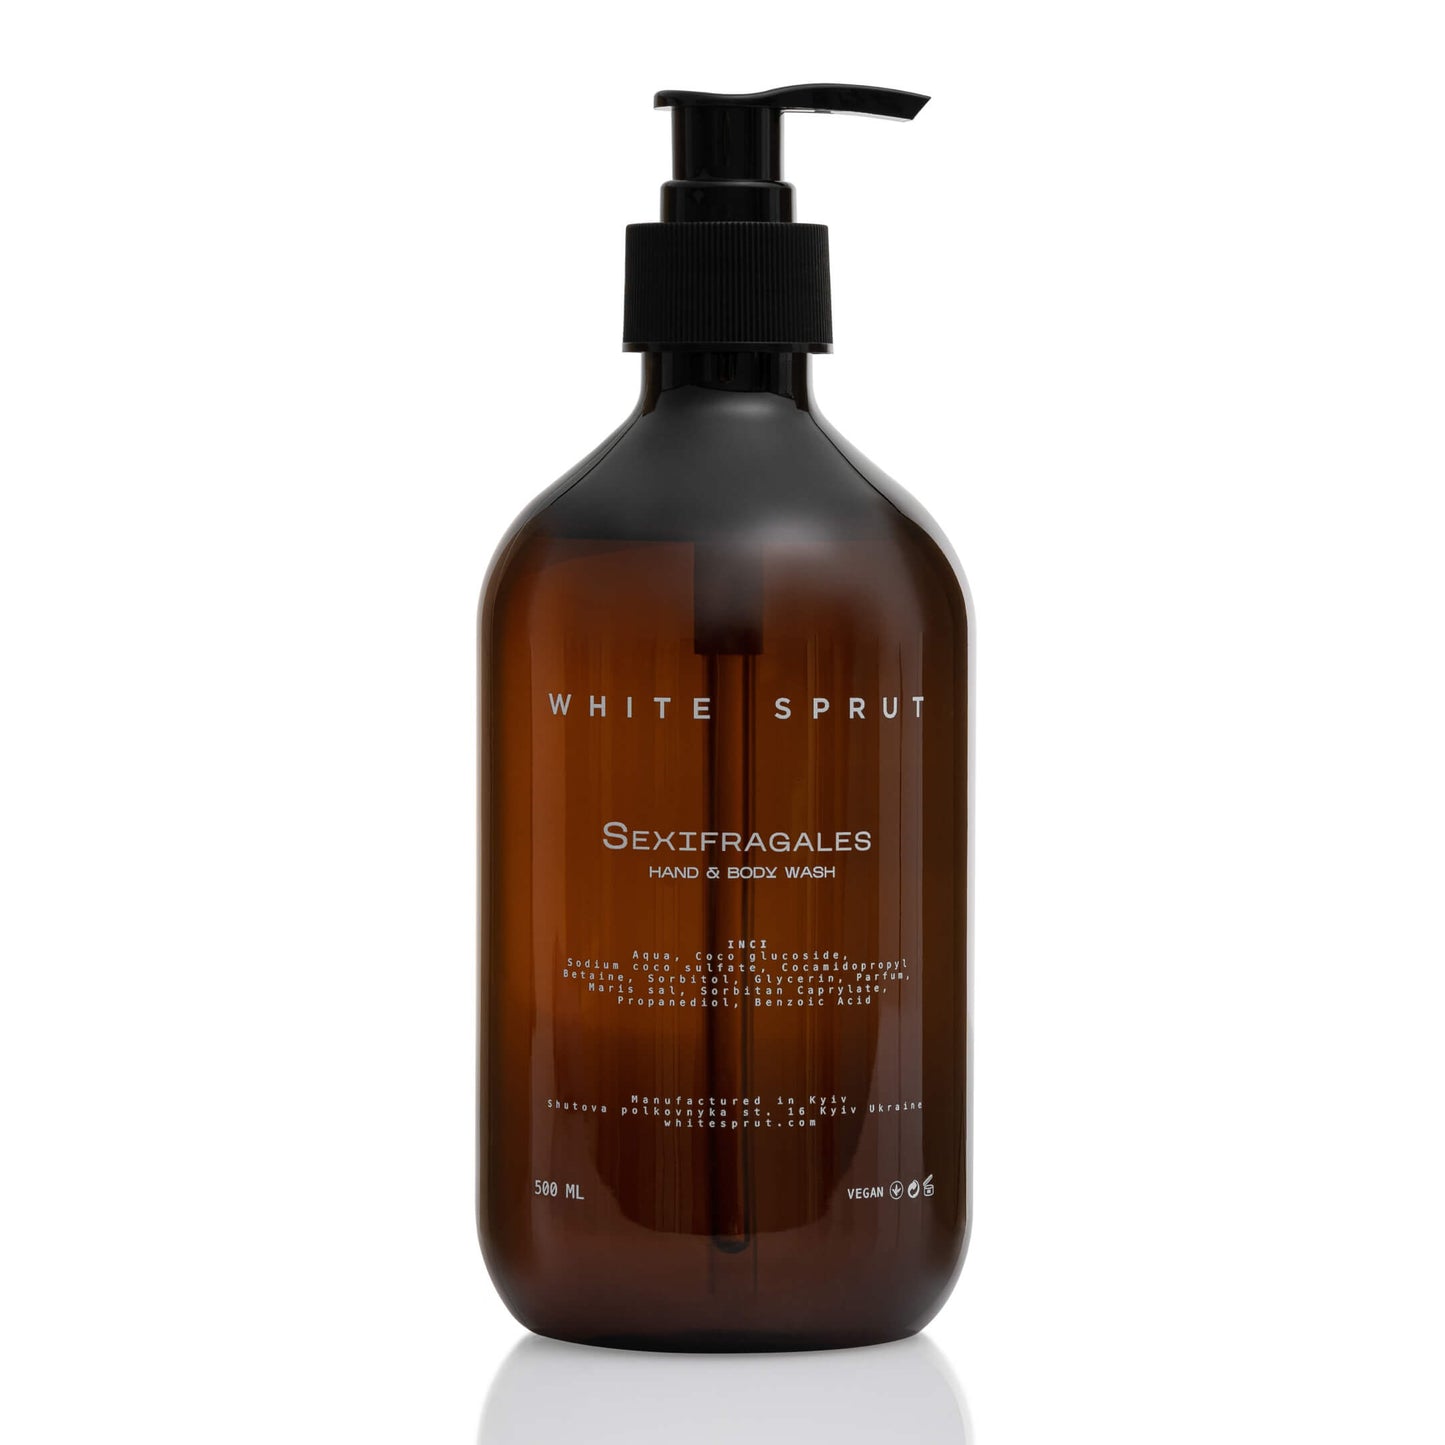 SEXIFRAGALES Hand & Body Wash